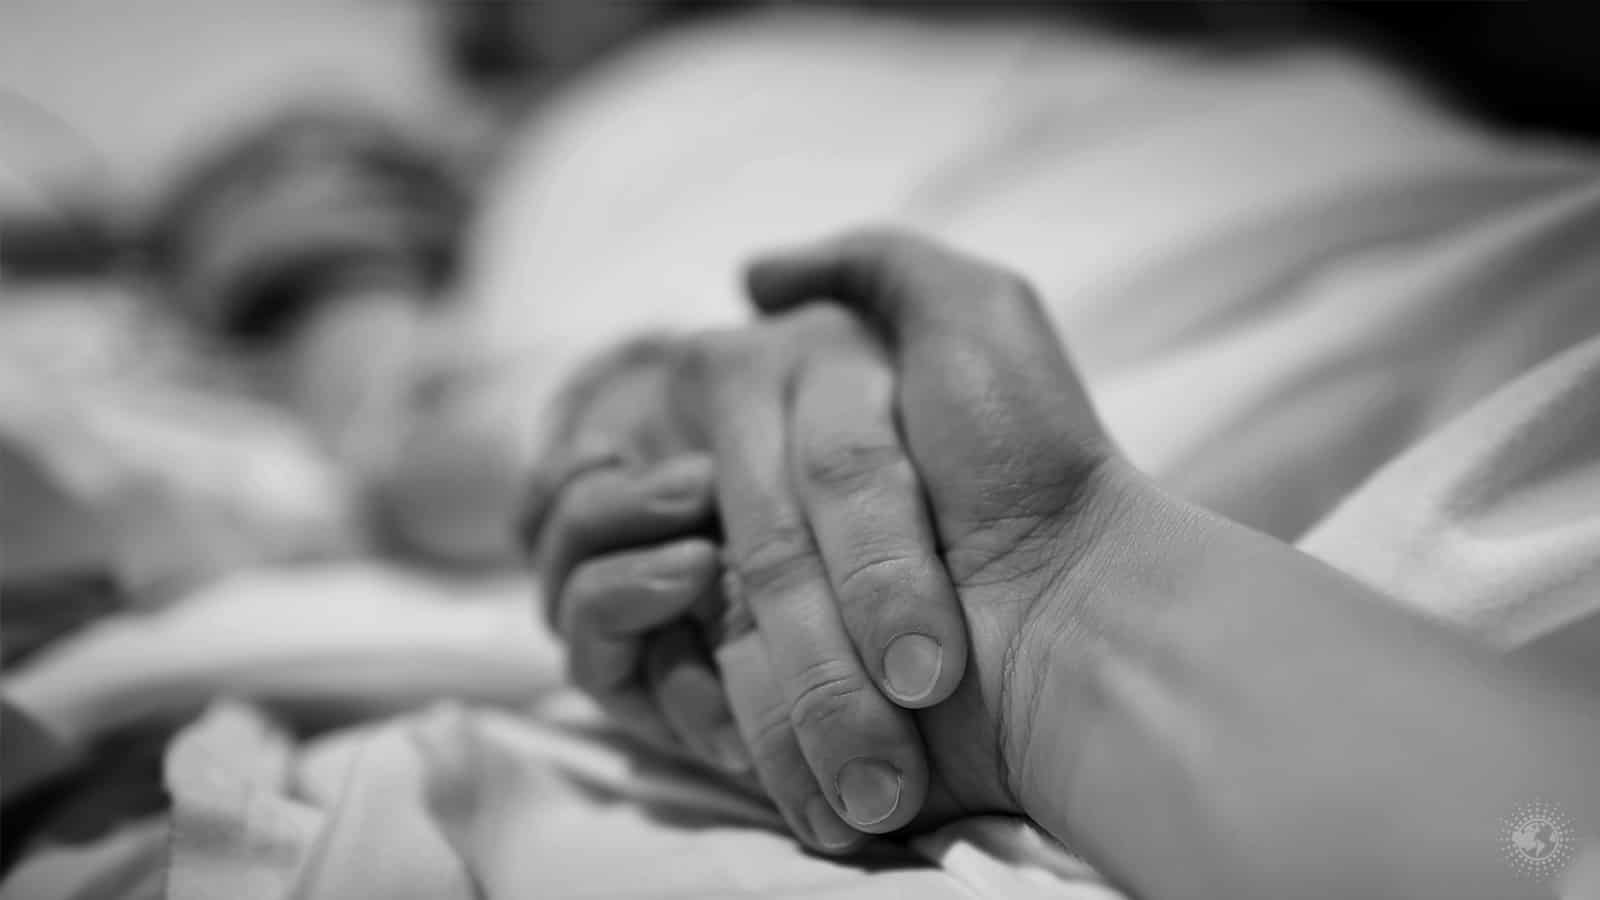 Hospice Nurses Reveal 5 Regrets That People Make on Their